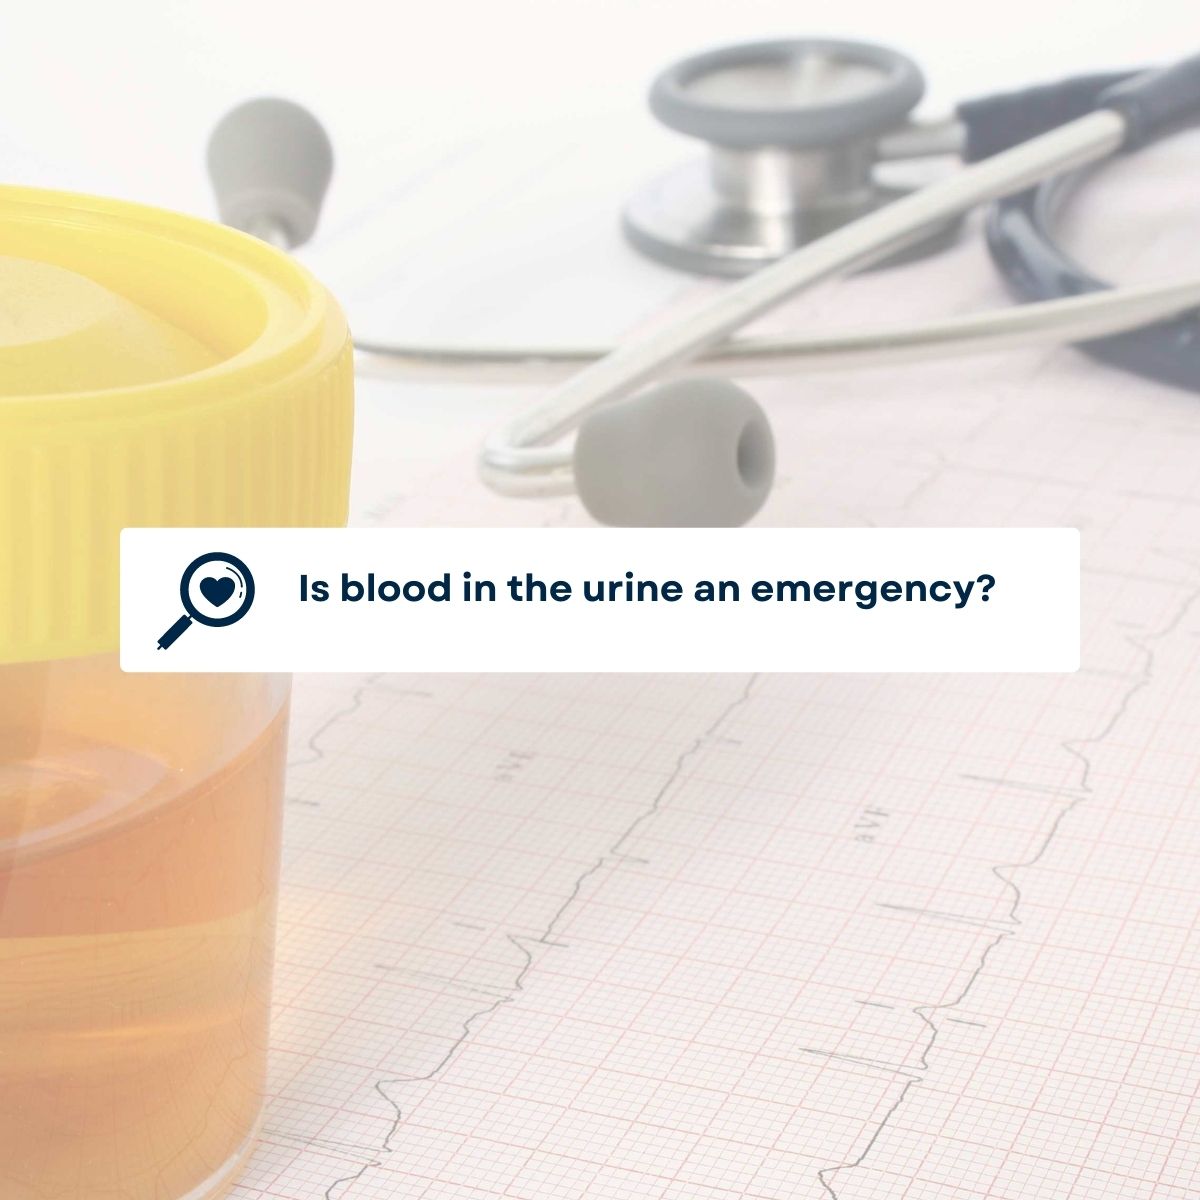 Blood in the urine Have you ever noticed that the color of your urine is darker than normal?